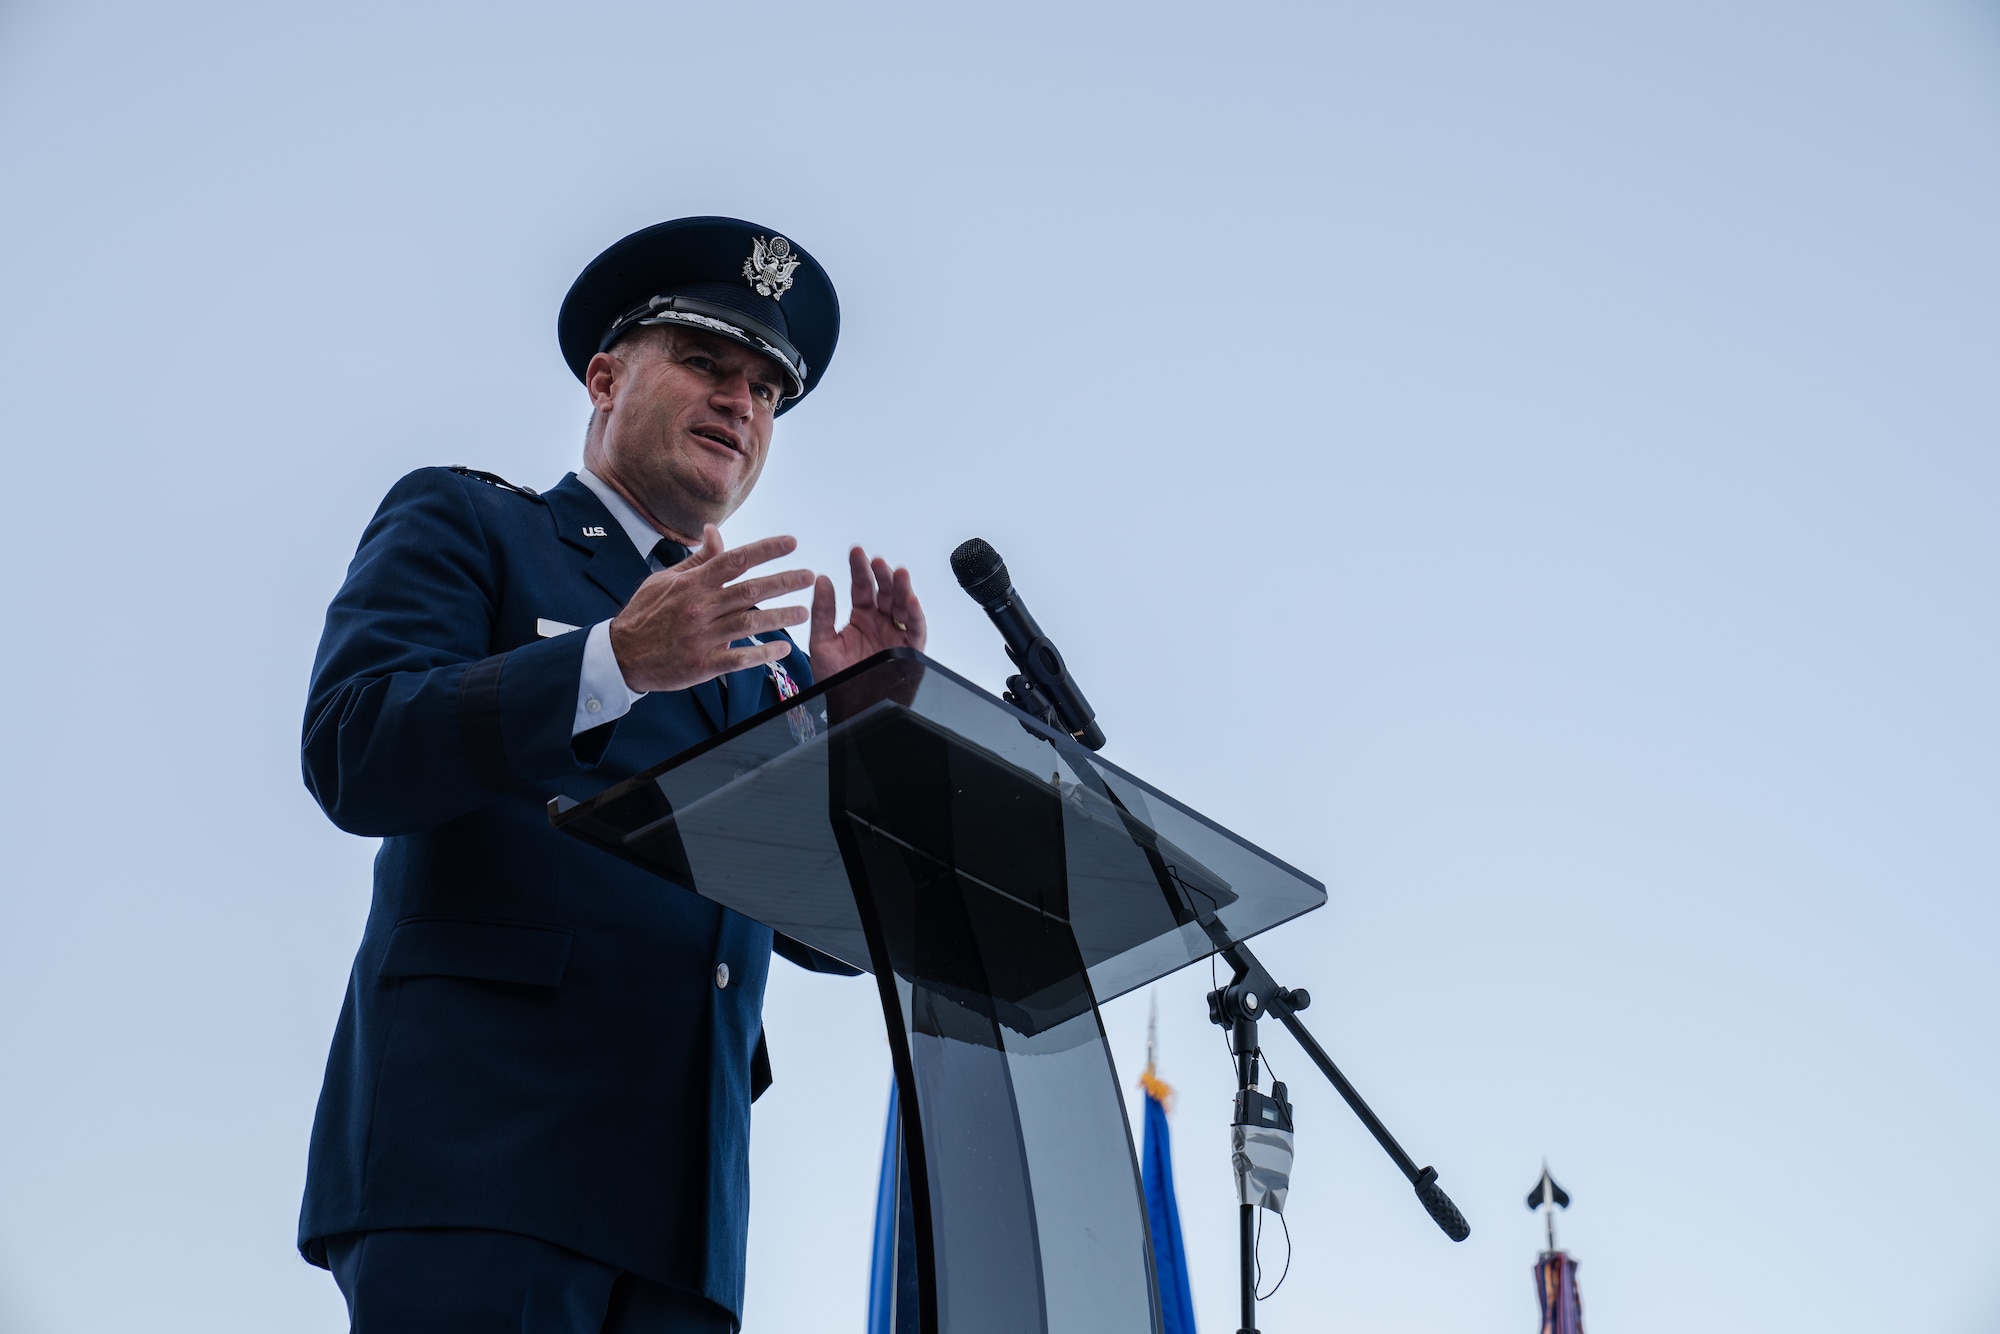 U.S. Air Force Maj. Gen. Kenneth Bibb Jr., 18th Air Force commander, speaks during the 6th Air Refueling Wing change of command ceremony at MacDill Air Force Base, Florida, July 29, 2022.